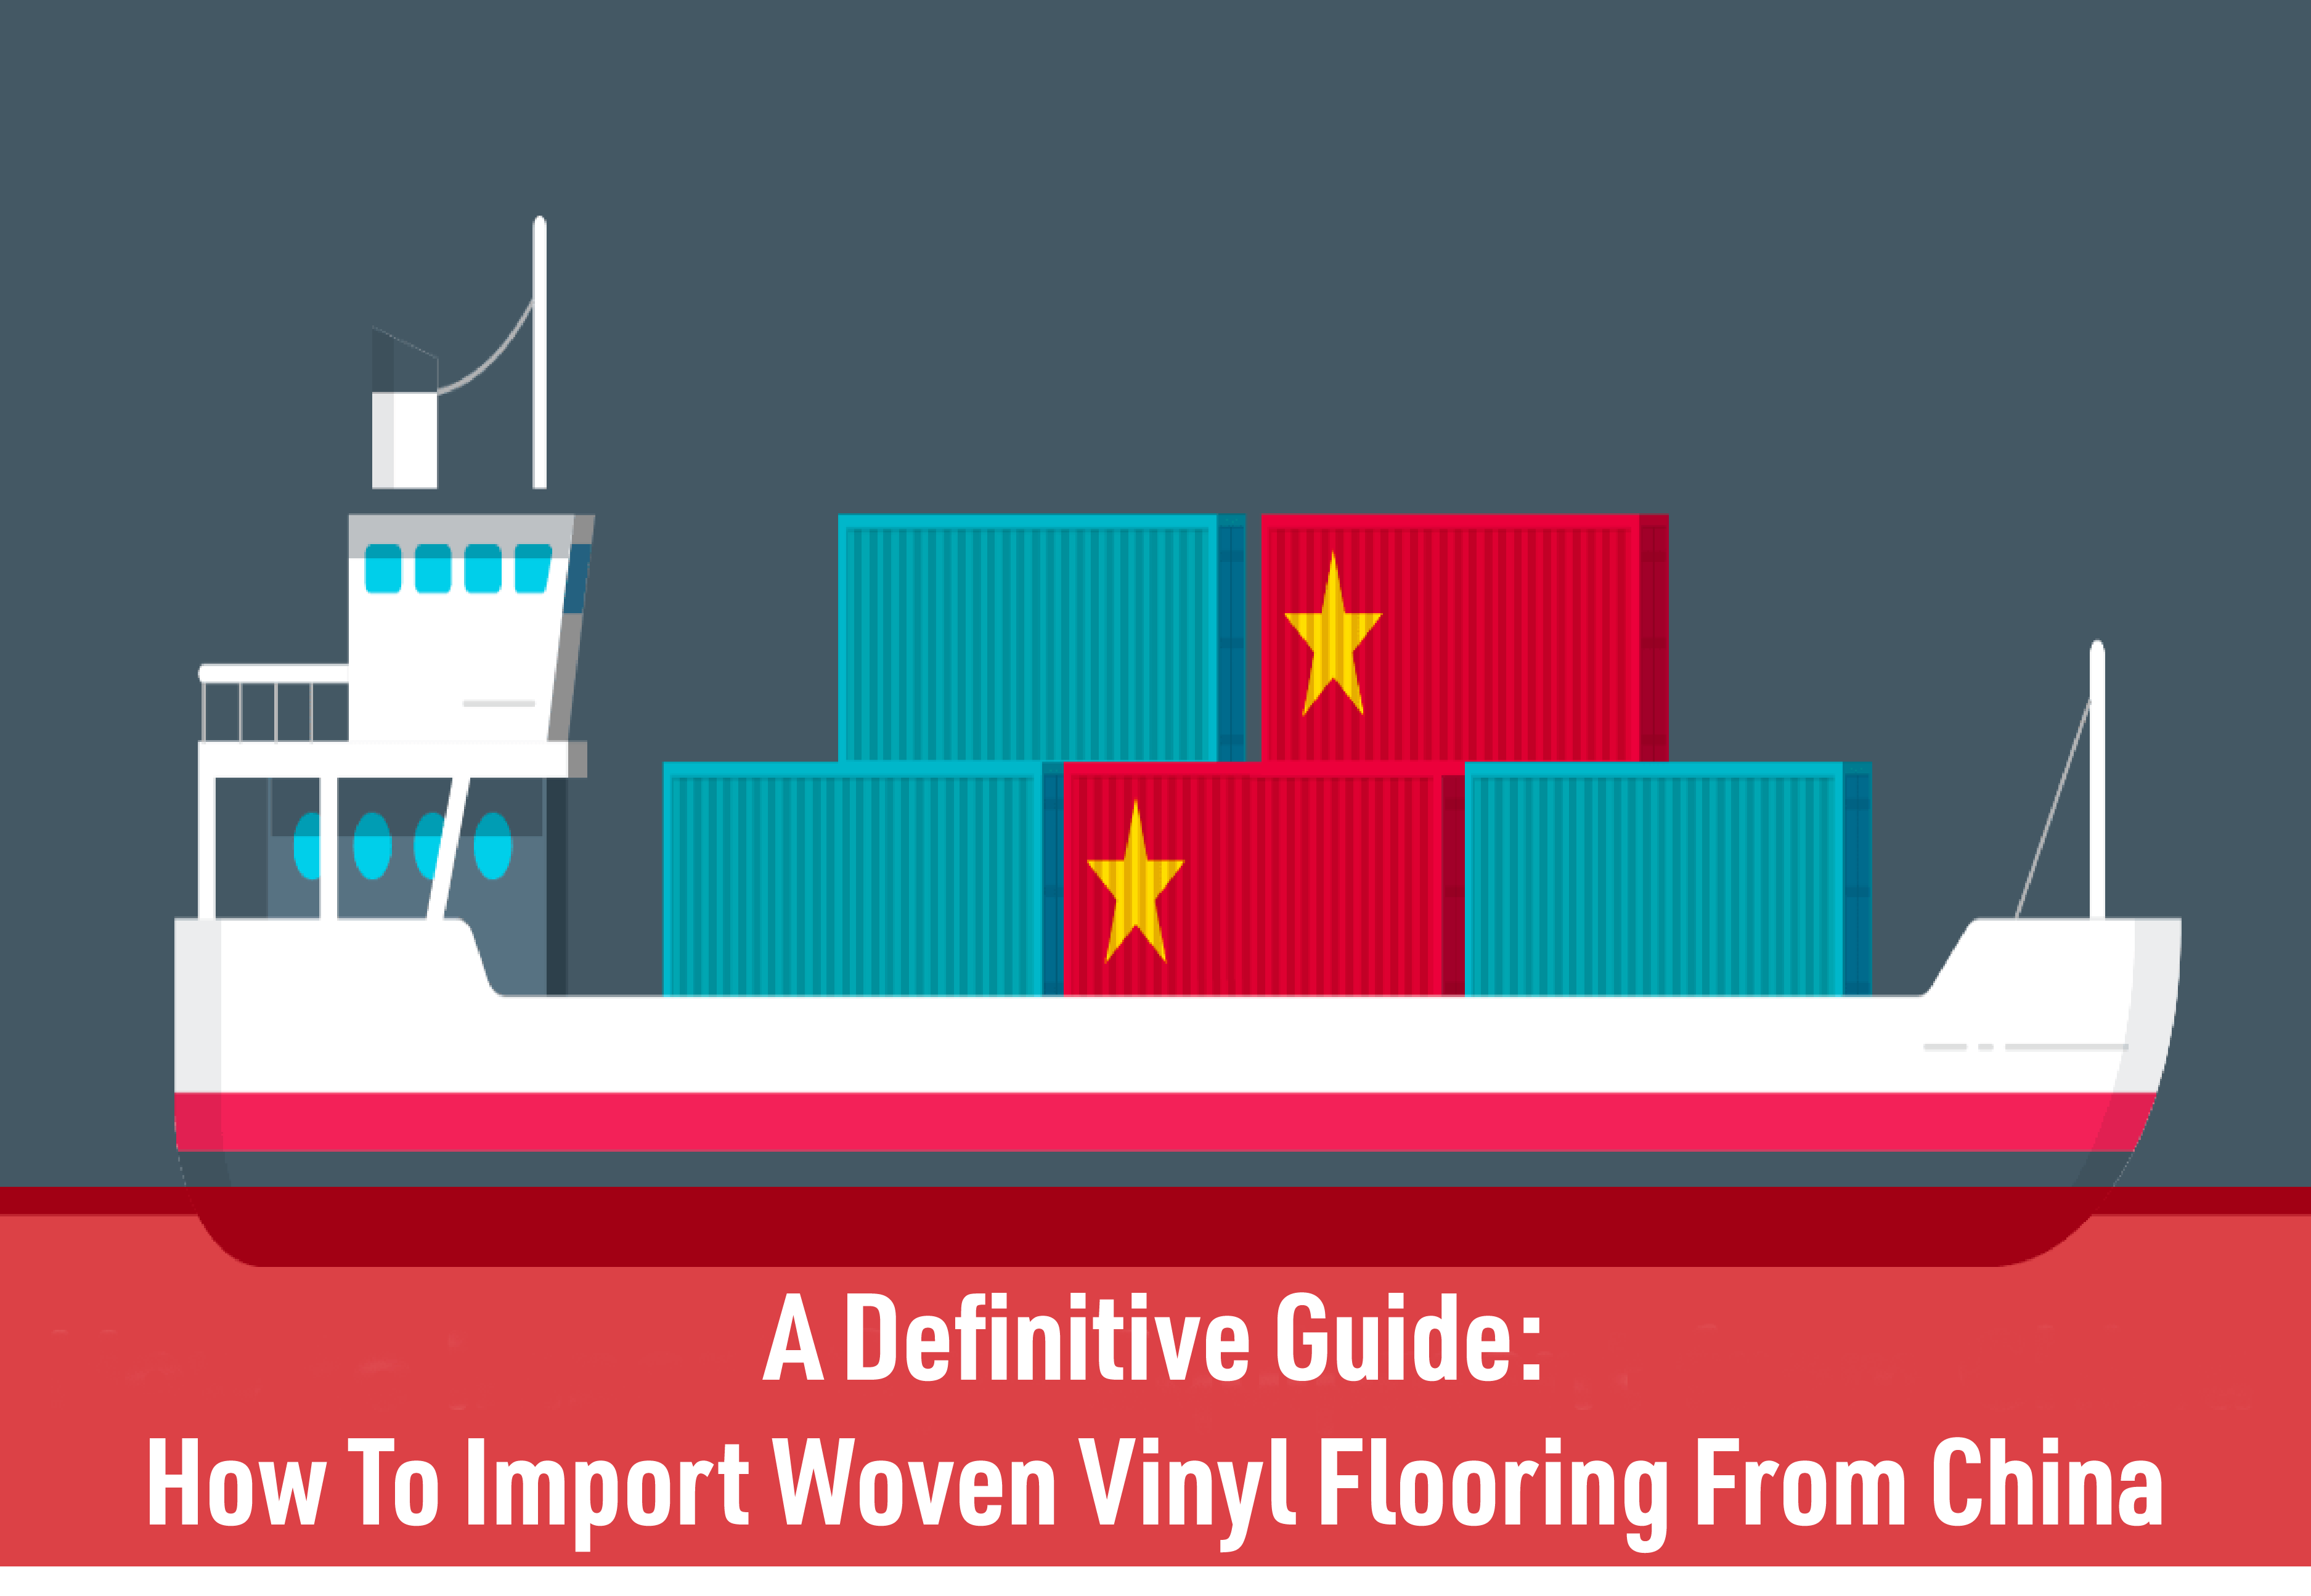 How To Import Woven Vinyl Flooring From China – A Definitive Guide